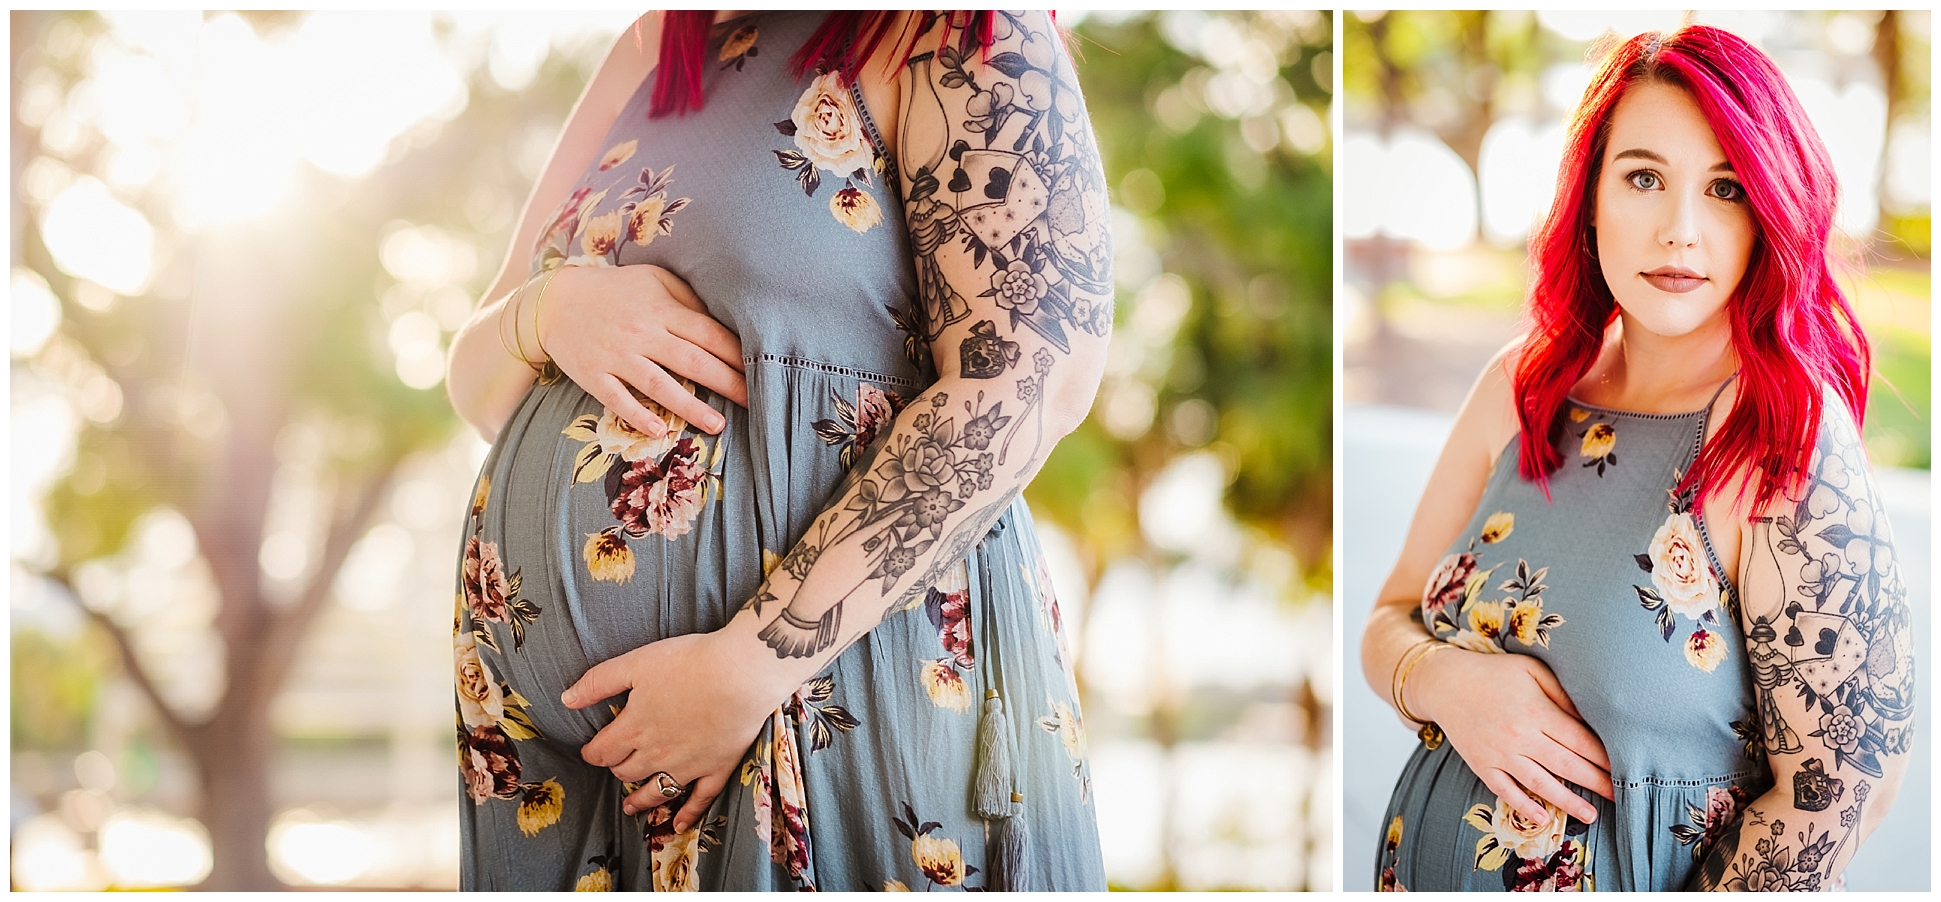 tampa-rad red-maternity-floral dress-armature works-rialto theater_0031.jpg